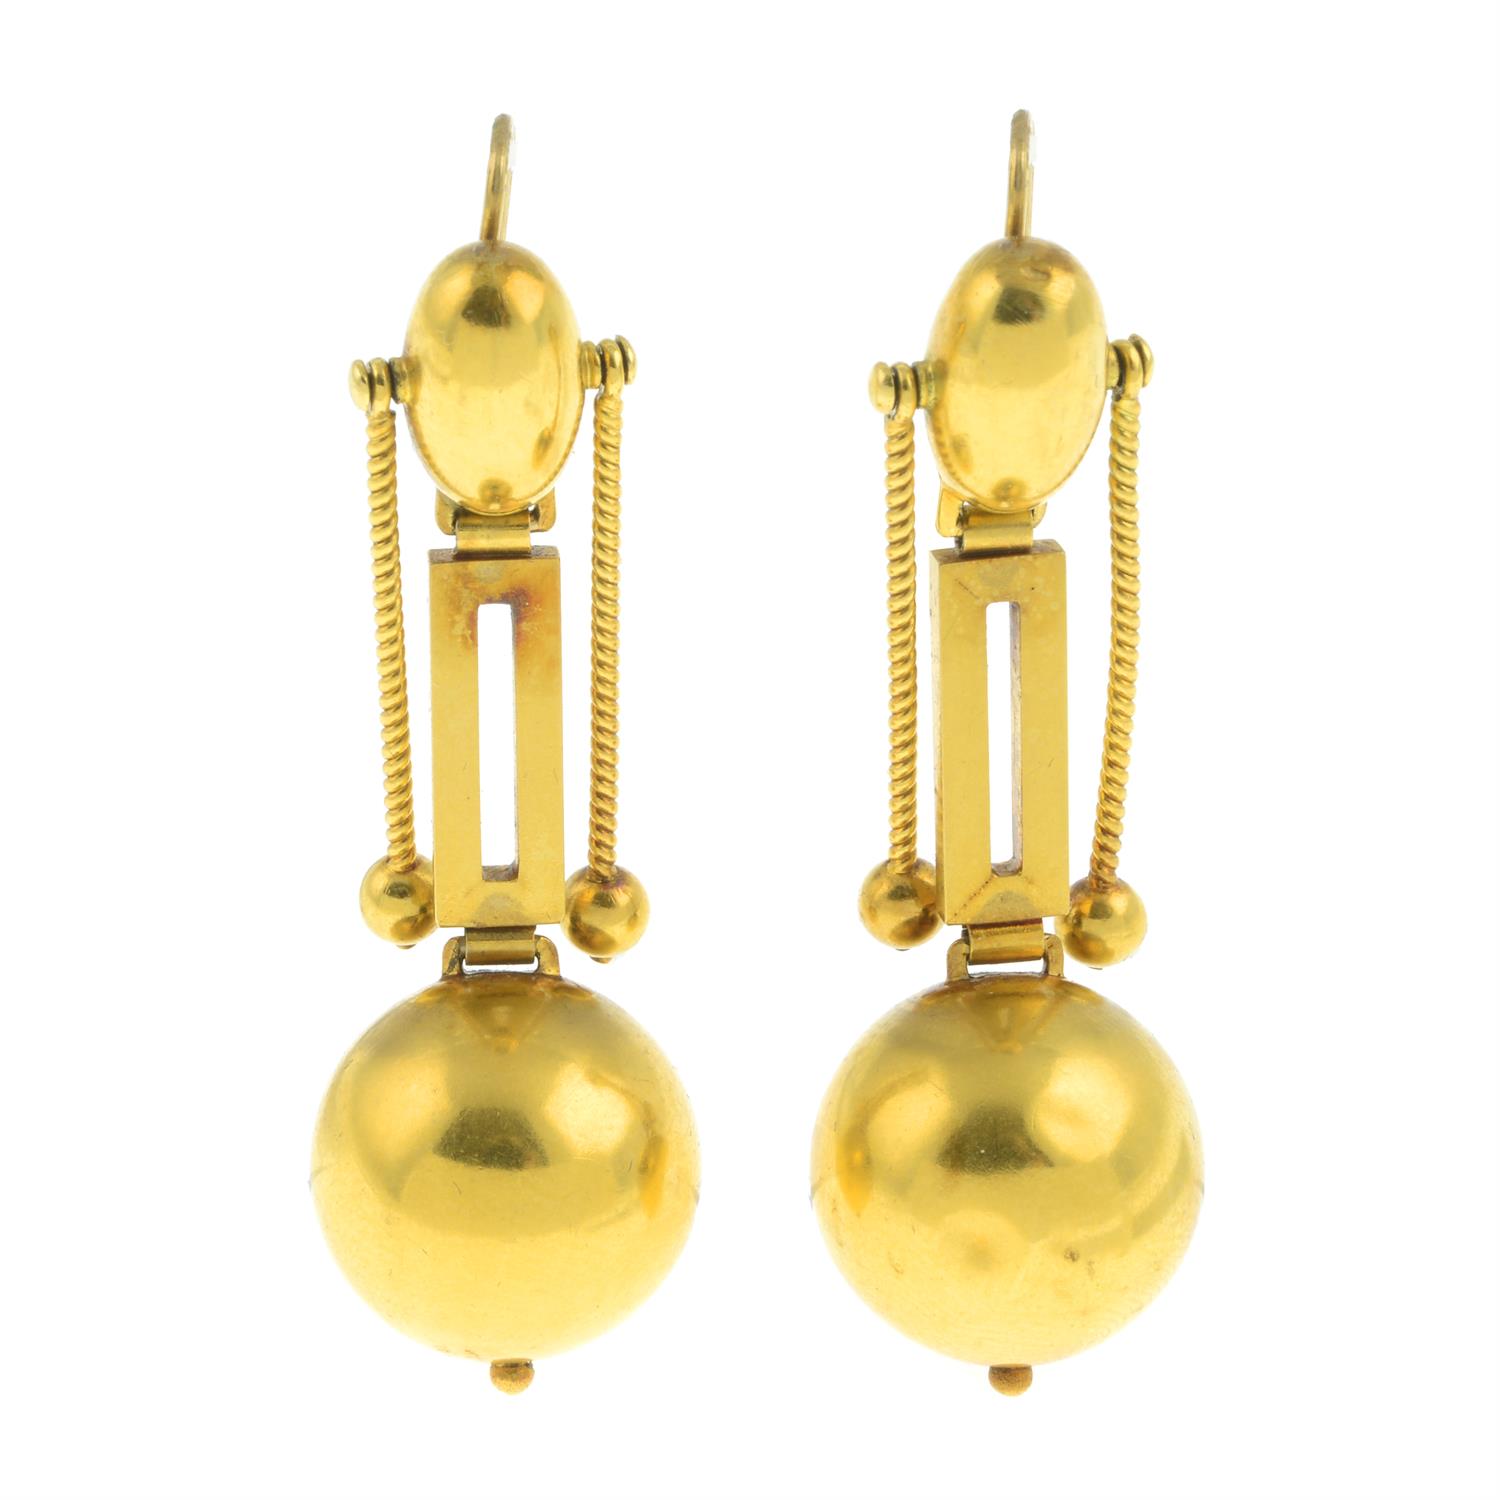 Victorian gold earrings - Image 2 of 7